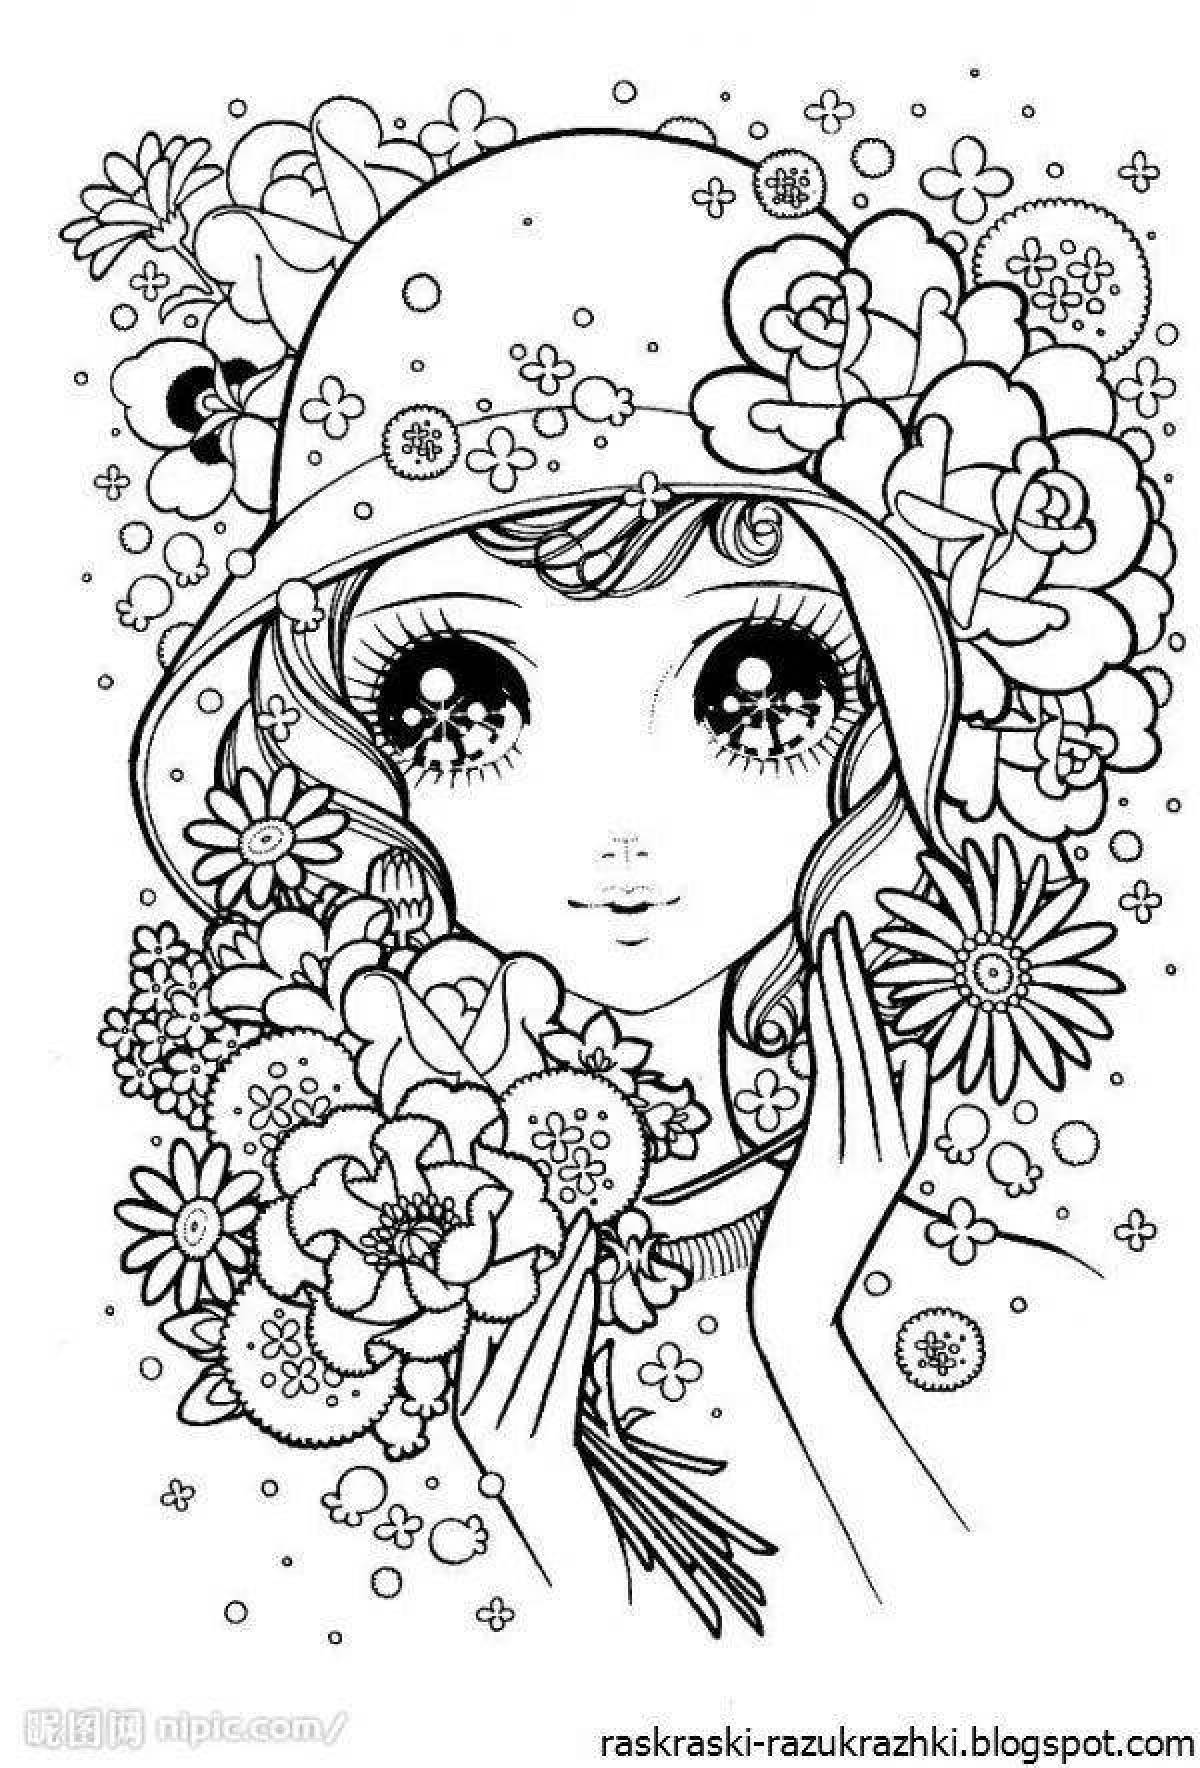 Fun coloring book for 14 year old girls